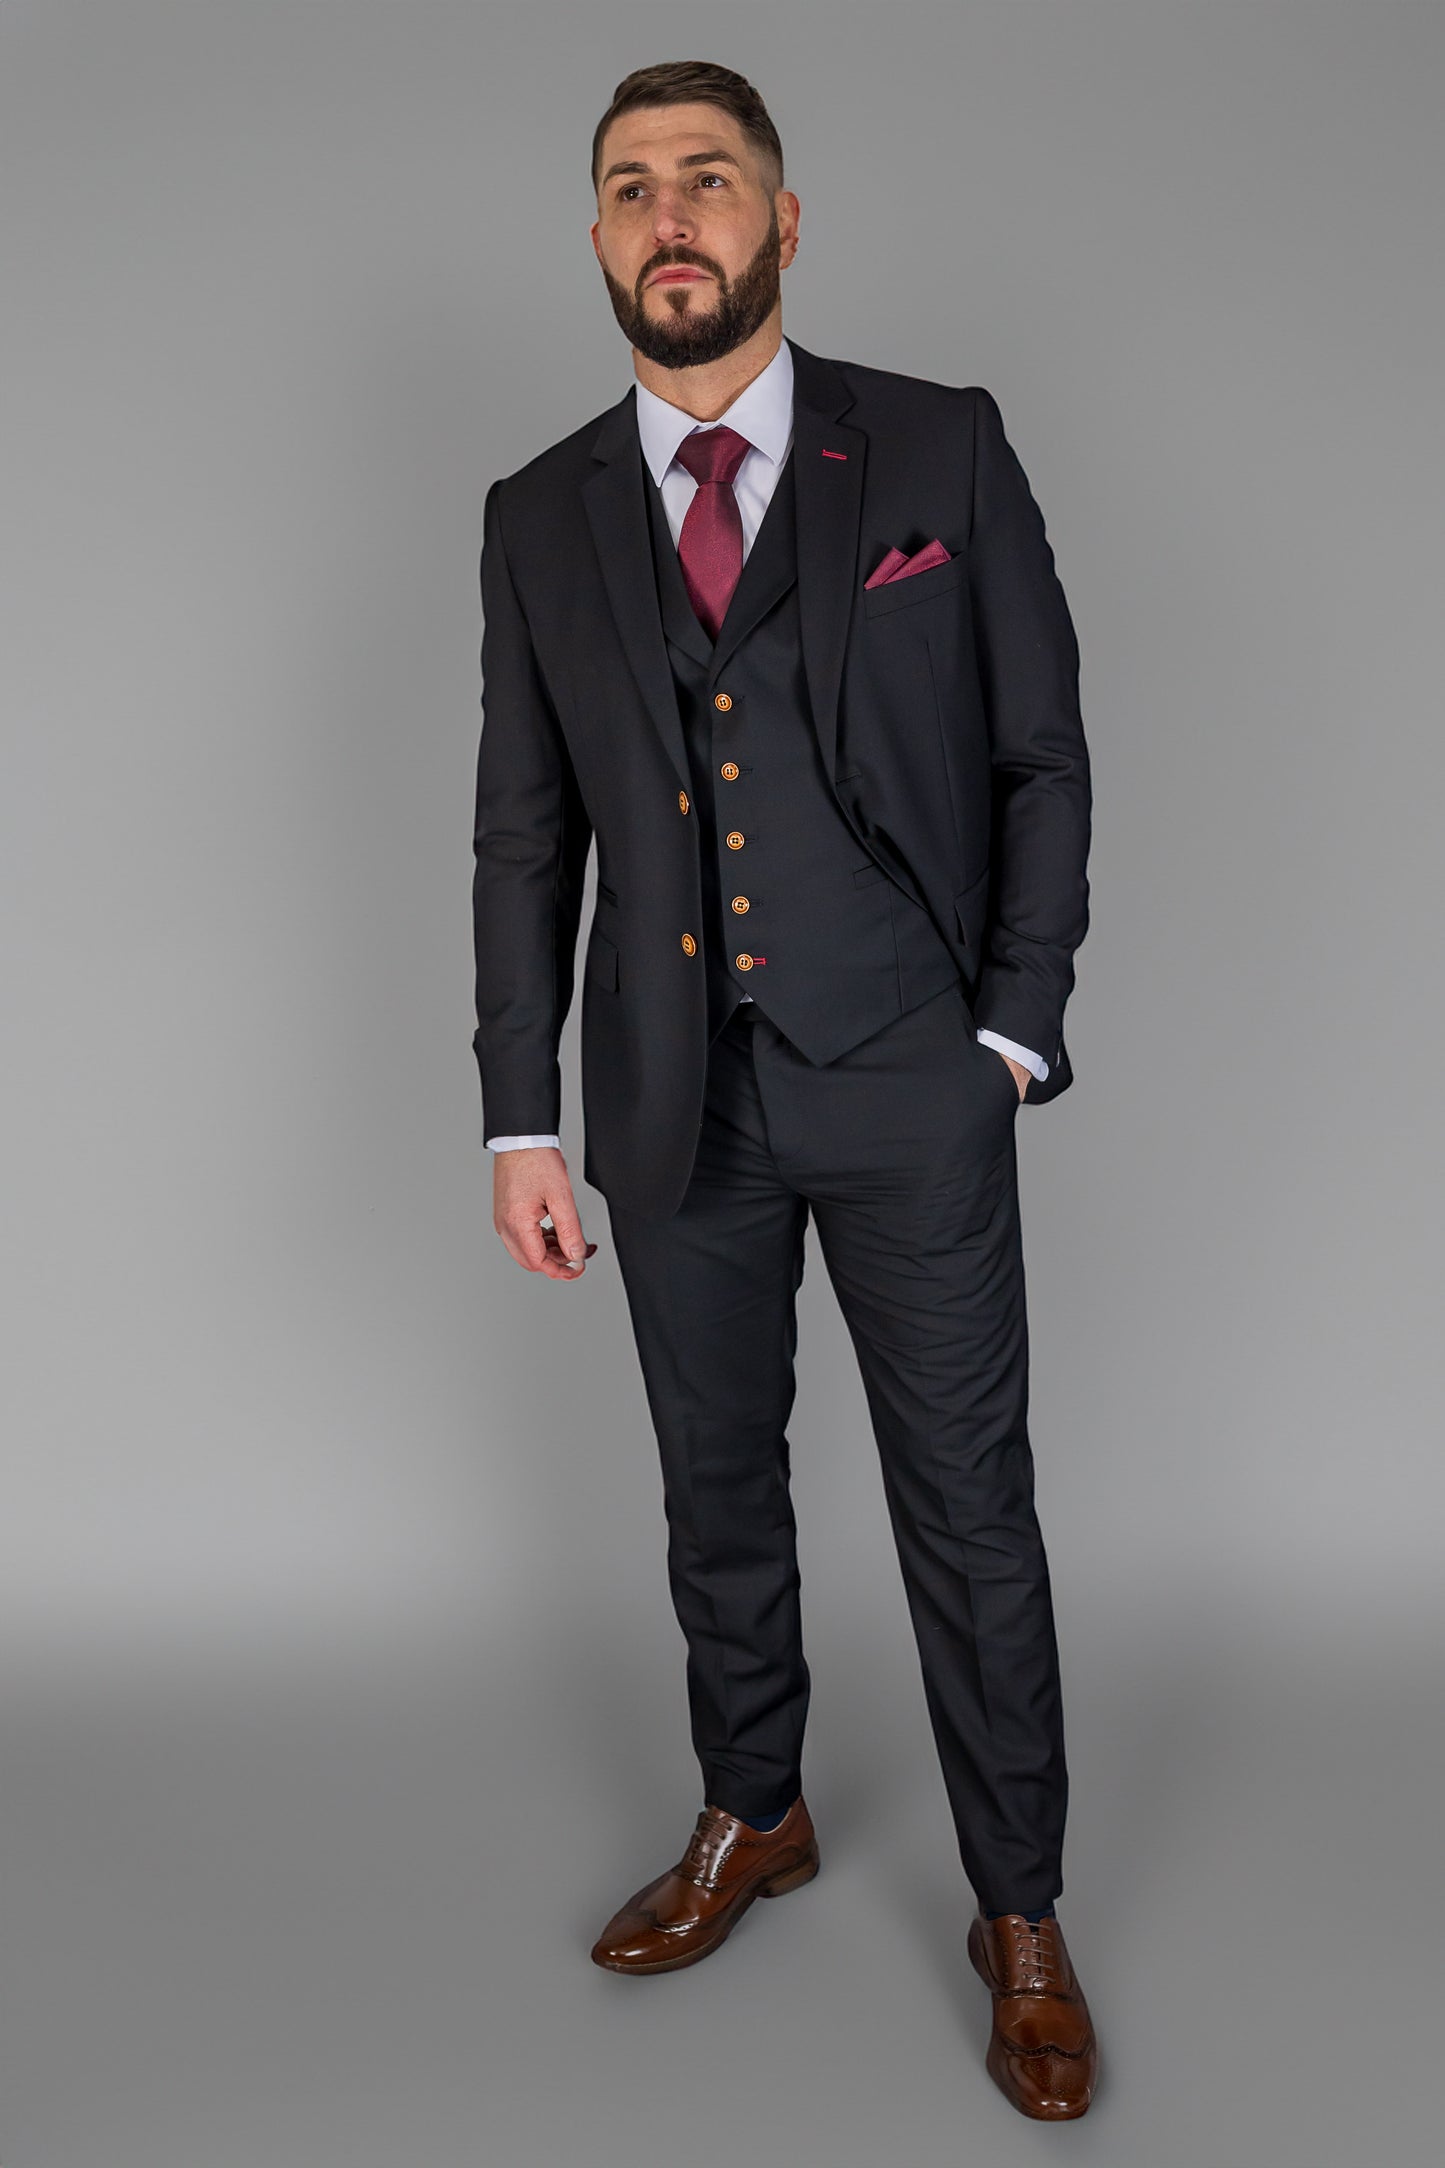 Mens Three Piece Suit Black Wedding Racing Prom Groom 3 Formal Special Occasion